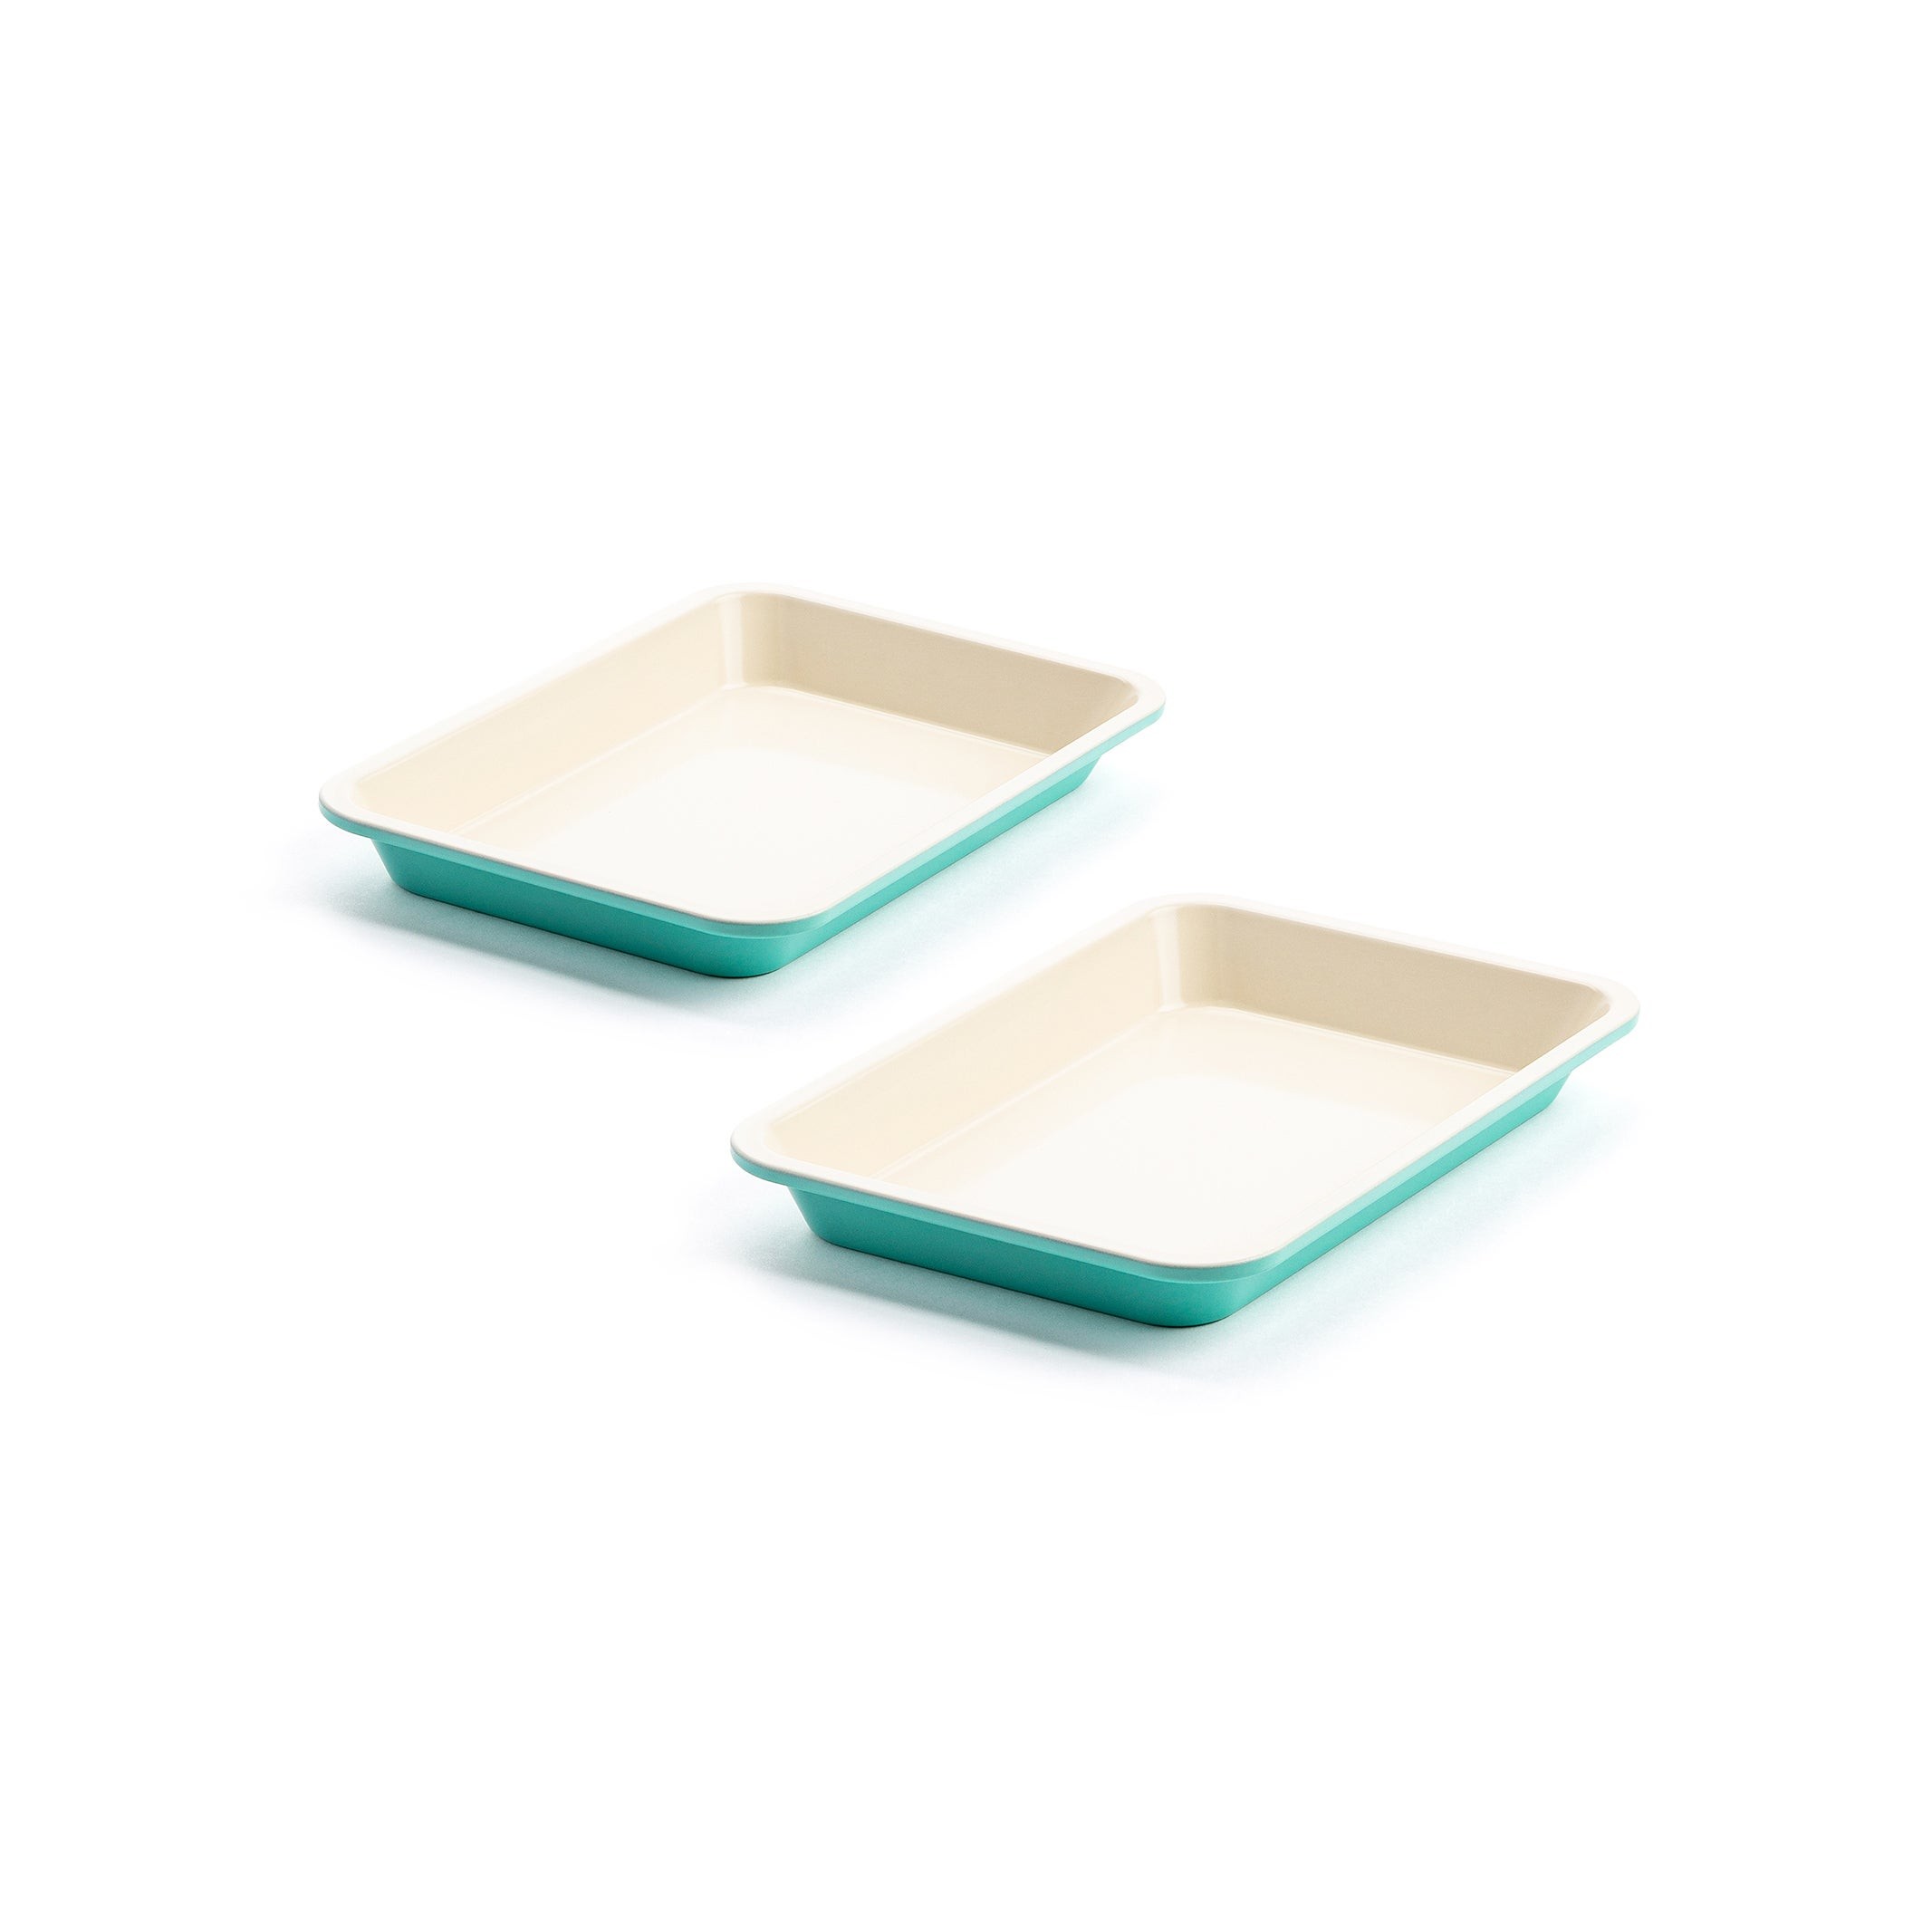 2pc Healthy Ceramic Nonstick 13" x 9" Cookie Sheet Set Turquoise